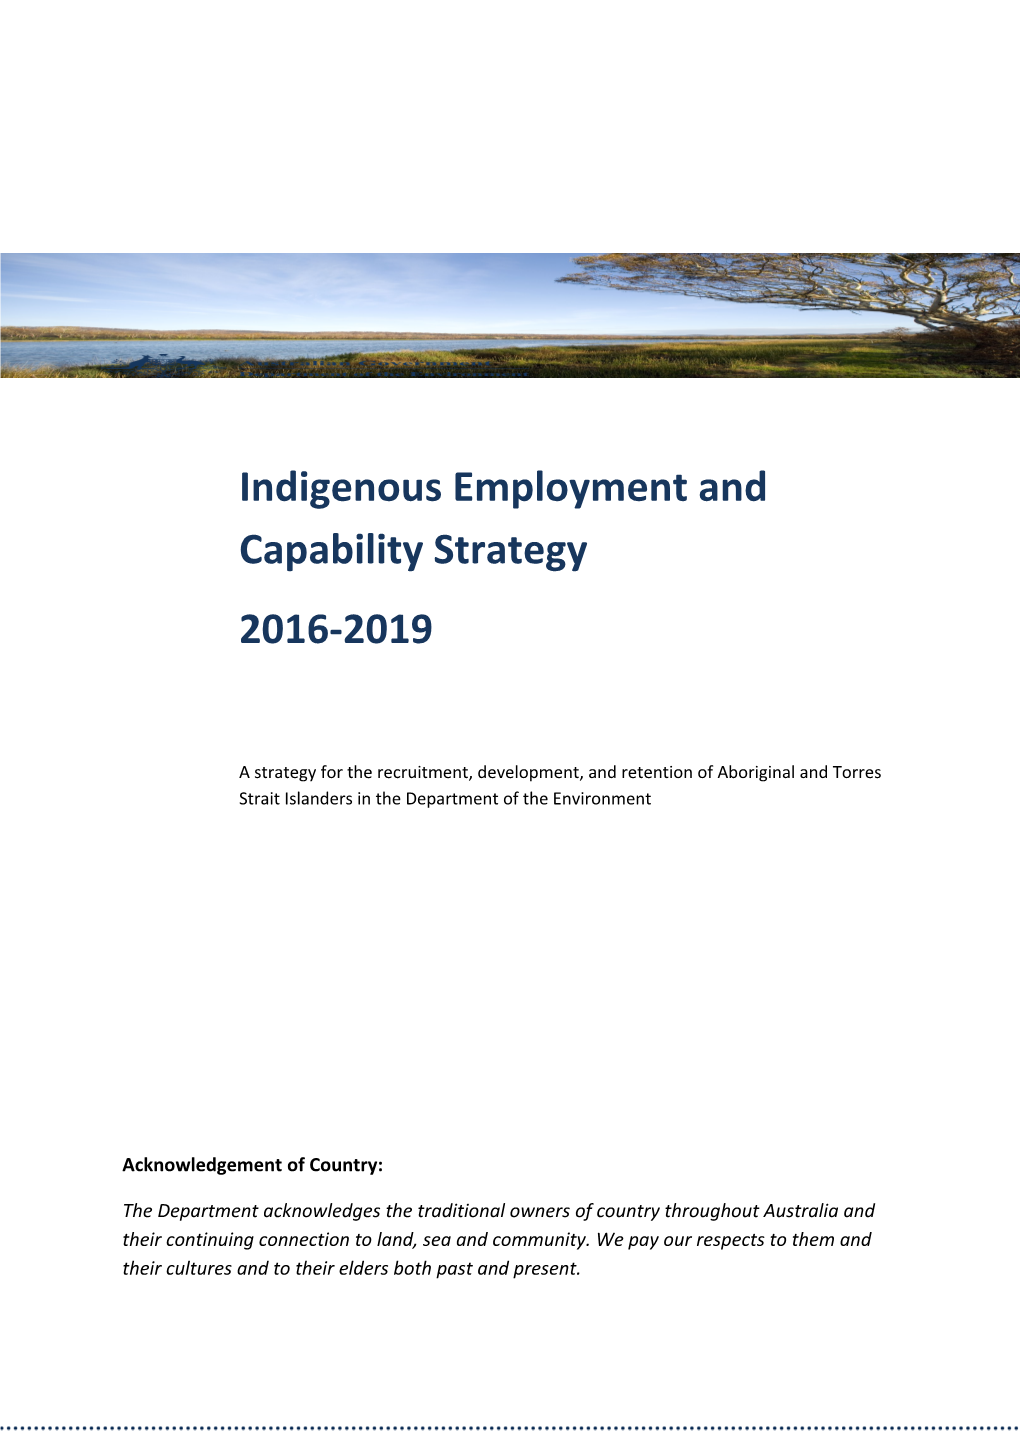 Indigenous Employment and Capability Strategy 2016-2019